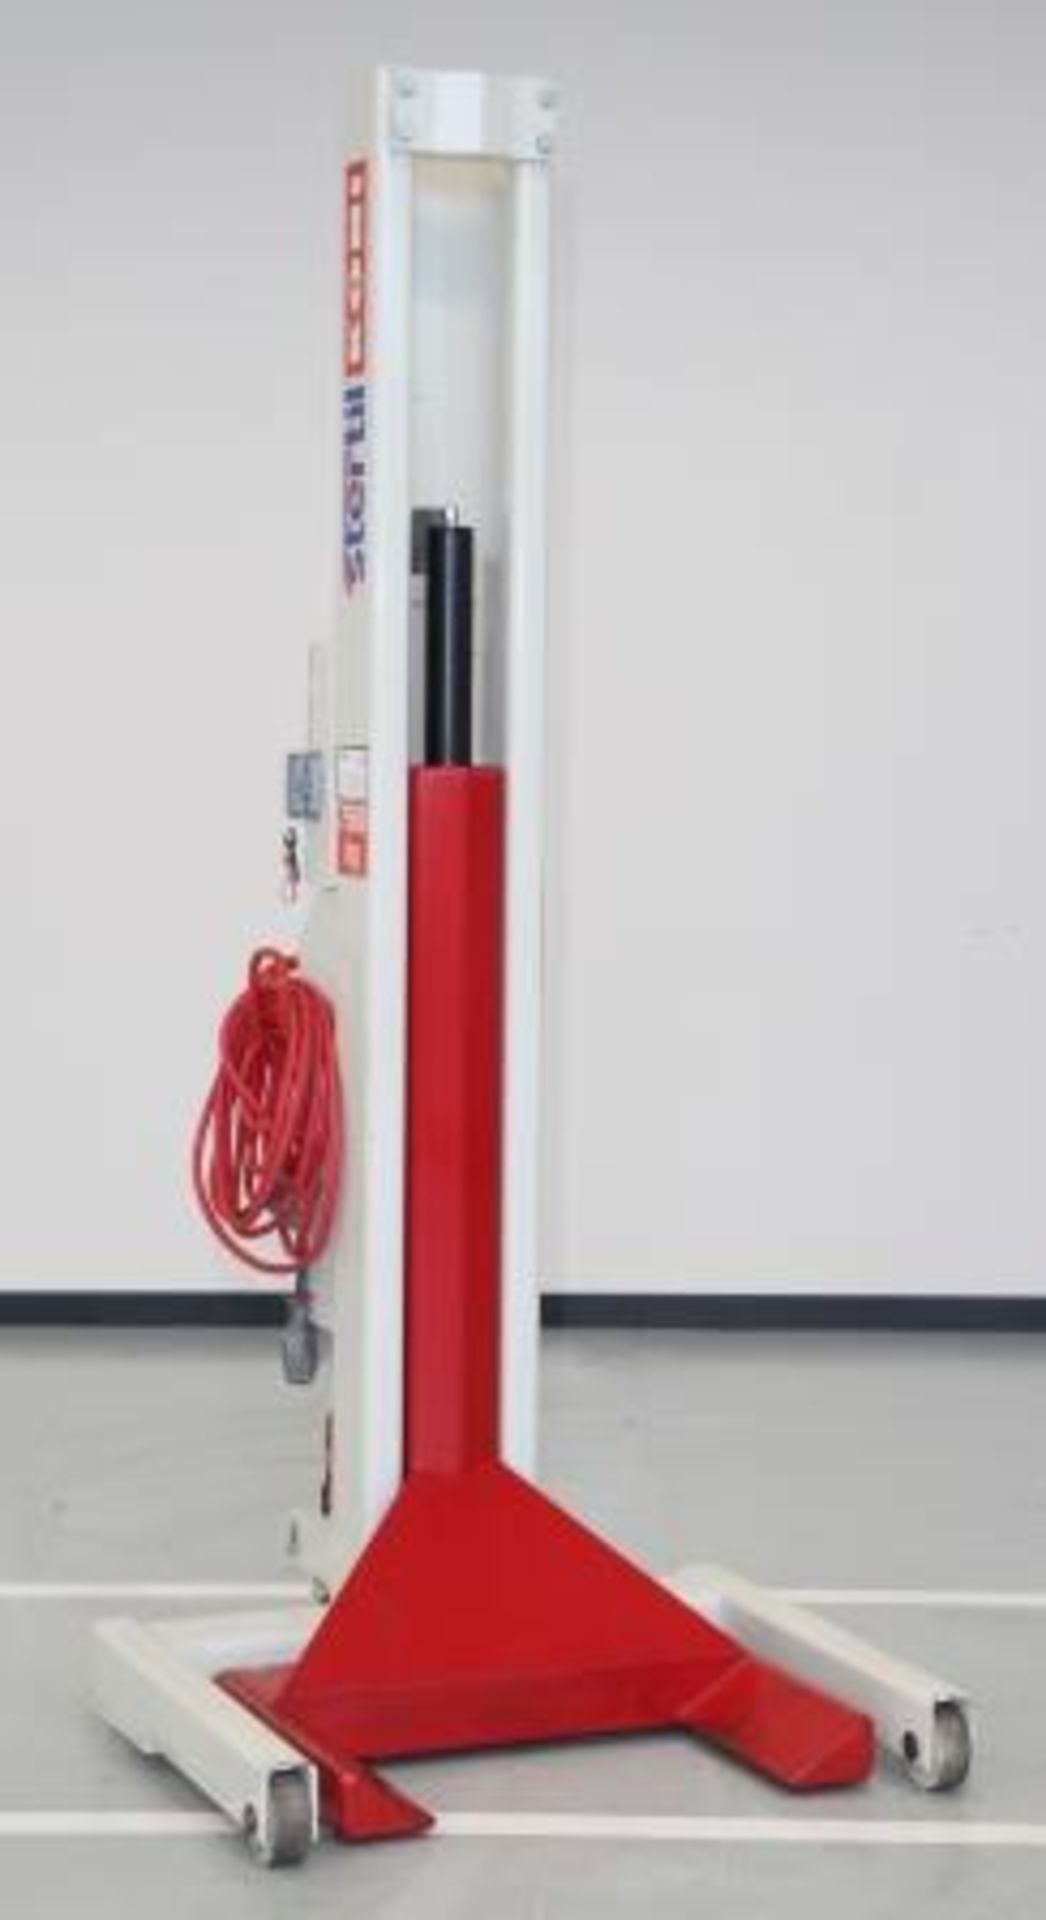 Stertil Koni Mobile Column Lifts (Cabled) - Image 5 of 20